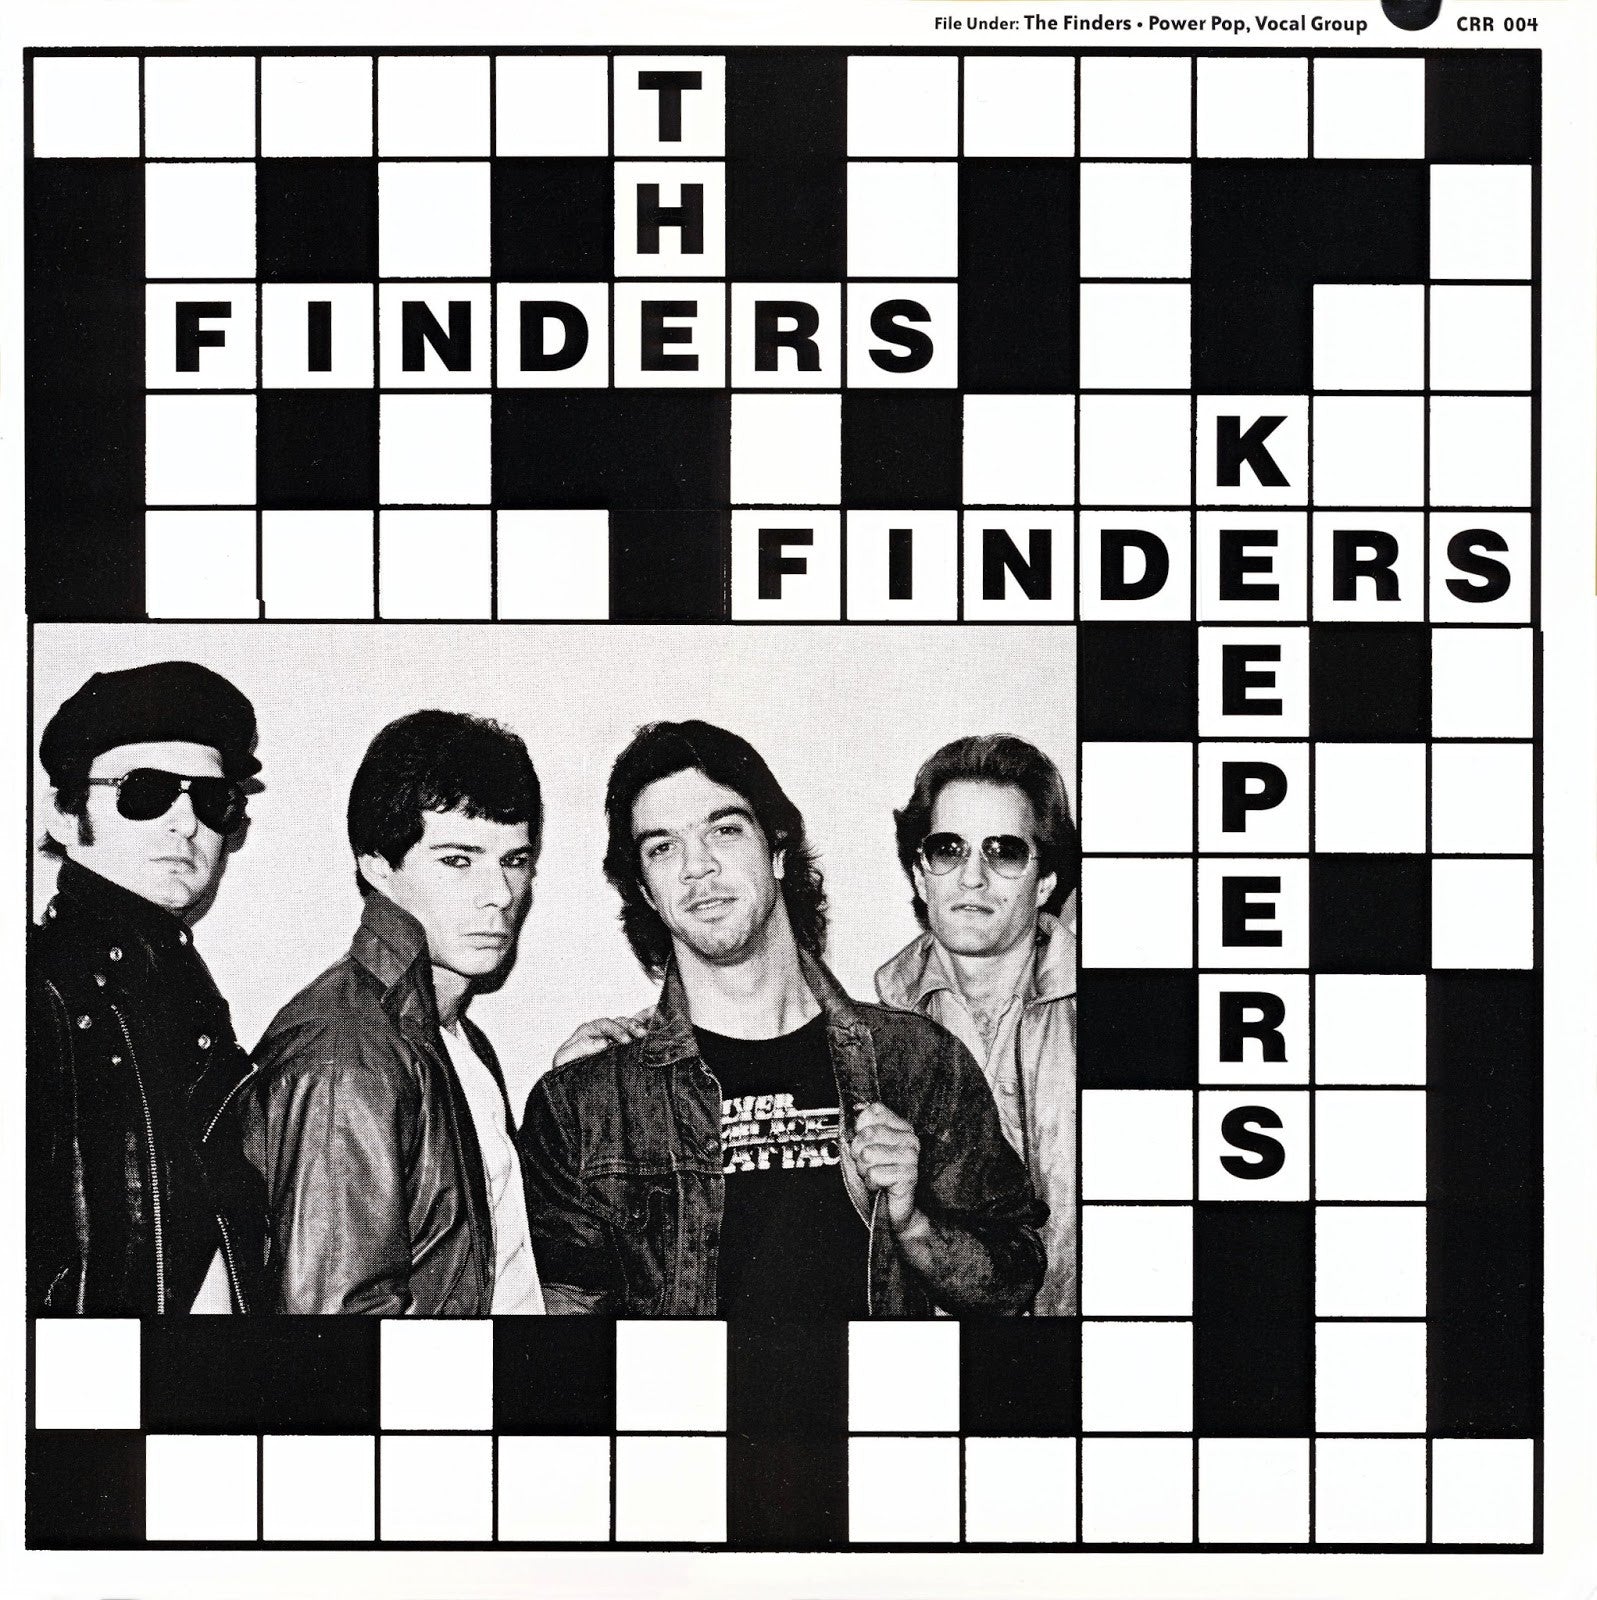 THE FINDERS- Finders Keepers LP ~REISSUE! - Cheap Rewards - Dead Beat Records